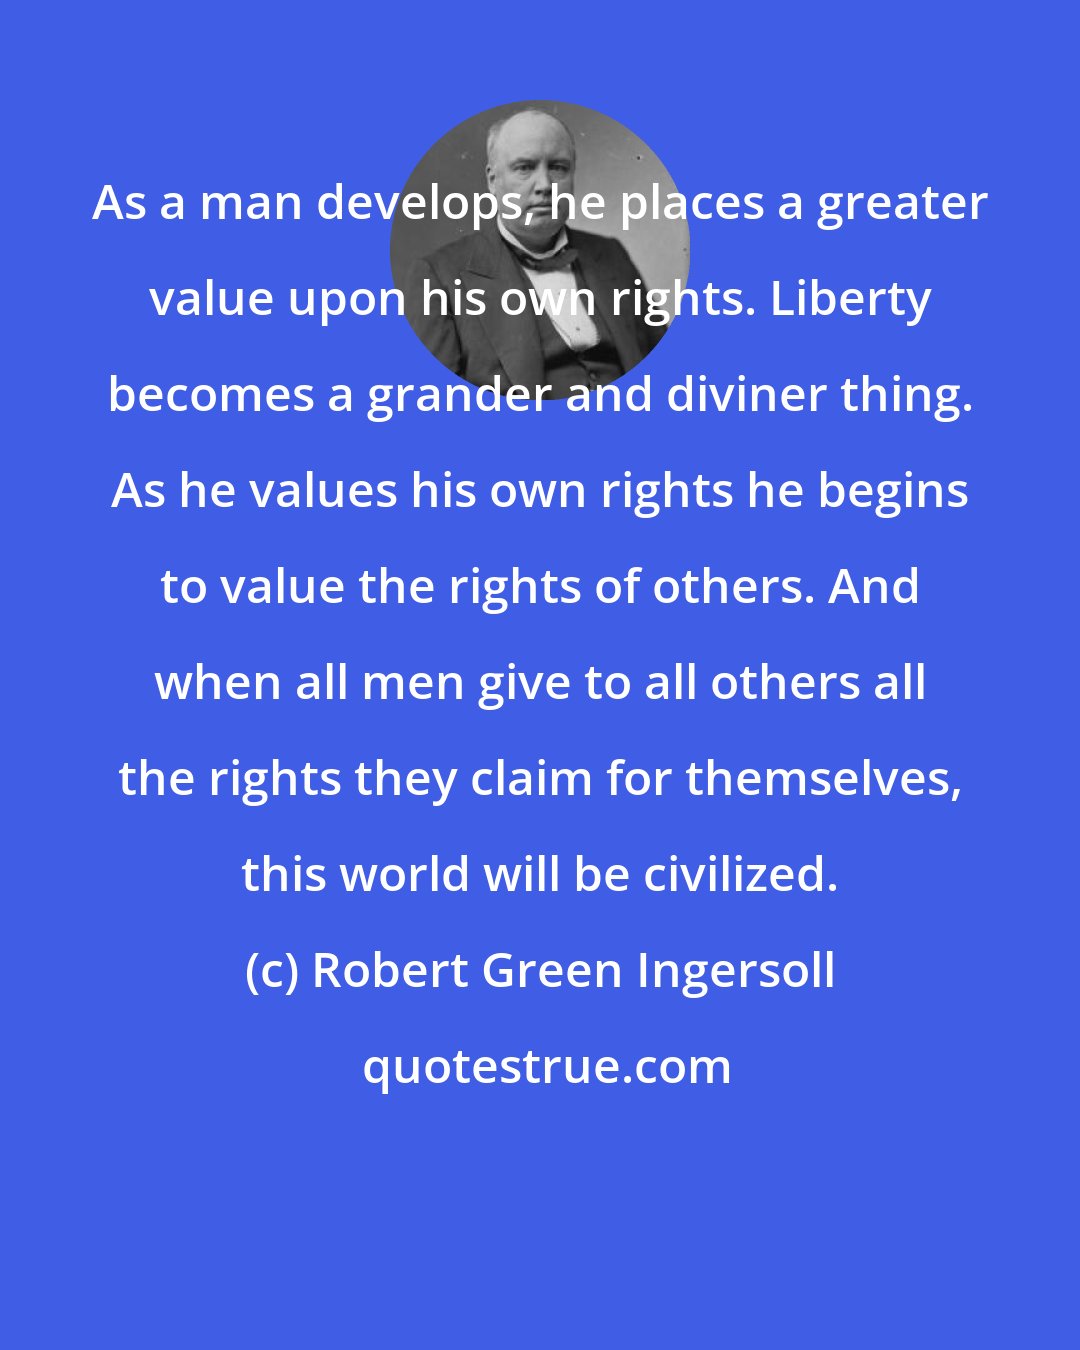 Robert Green Ingersoll: As a man develops, he places a greater value upon his own rights. Liberty becomes a grander and diviner thing. As he values his own rights he begins to value the rights of others. And when all men give to all others all the rights they claim for themselves, this world will be civilized.